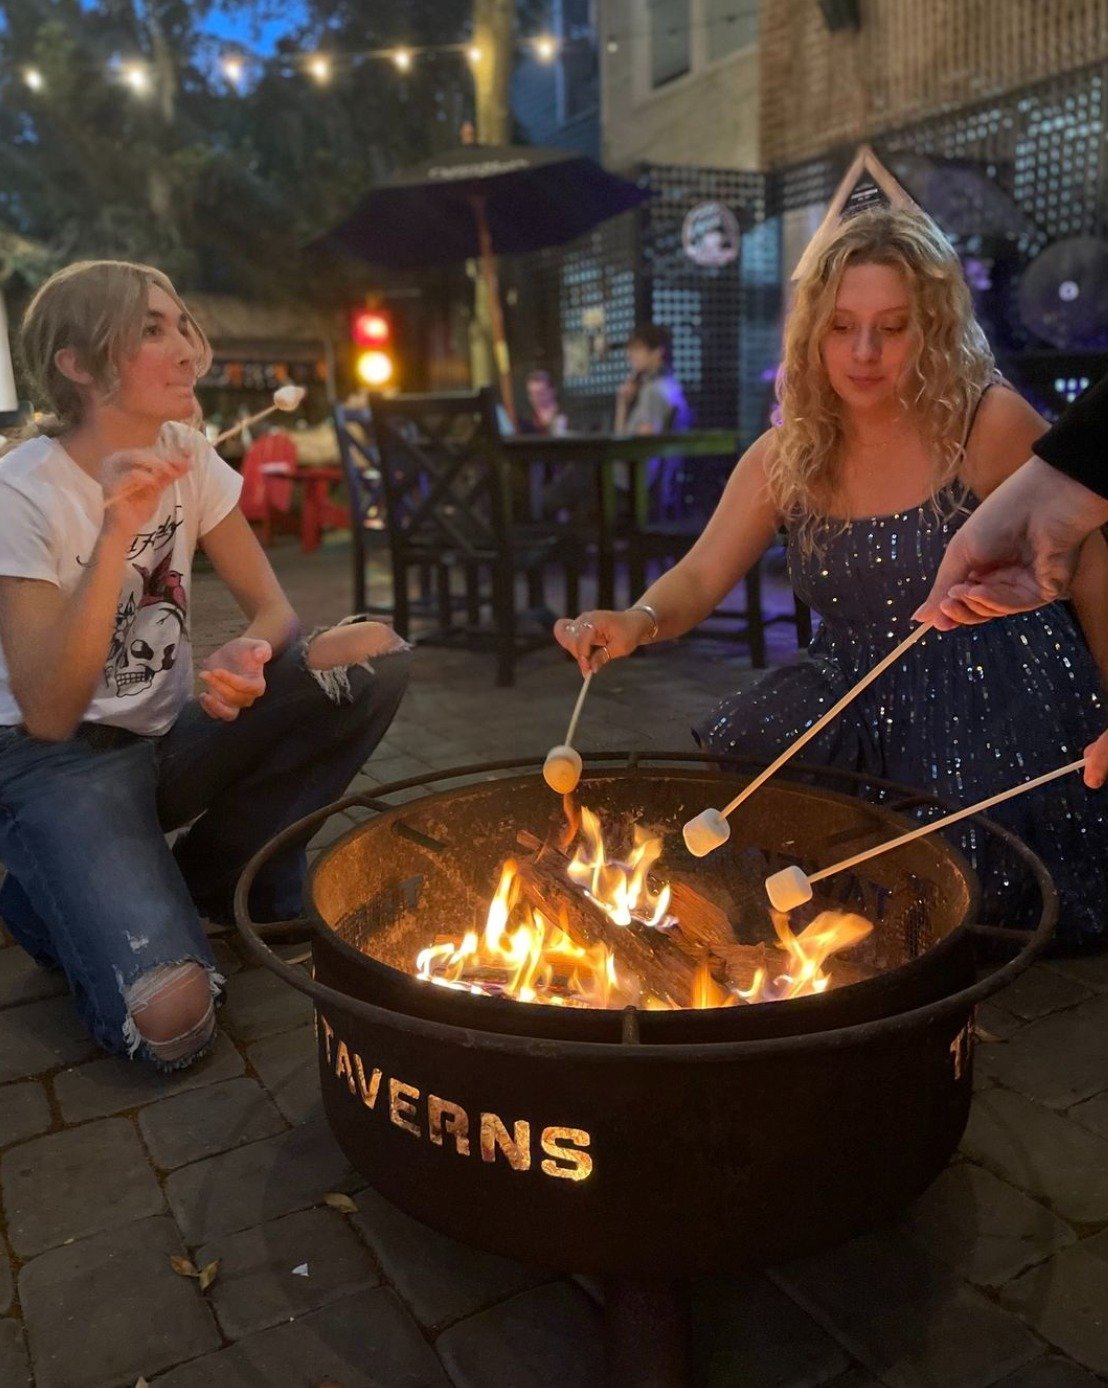 We&rsquo;ve got weekend plans you won't want to miss! 

Join us for Fire &amp; Wine tonight from 6-9PM for... 

🔥 Firepits in the courtyard 
🍫 S&rsquo;mores 
🍷 &frac12; priced bottles of wine 

#visitsavannahga #foxyloxycafe #halfpricedwine #smore